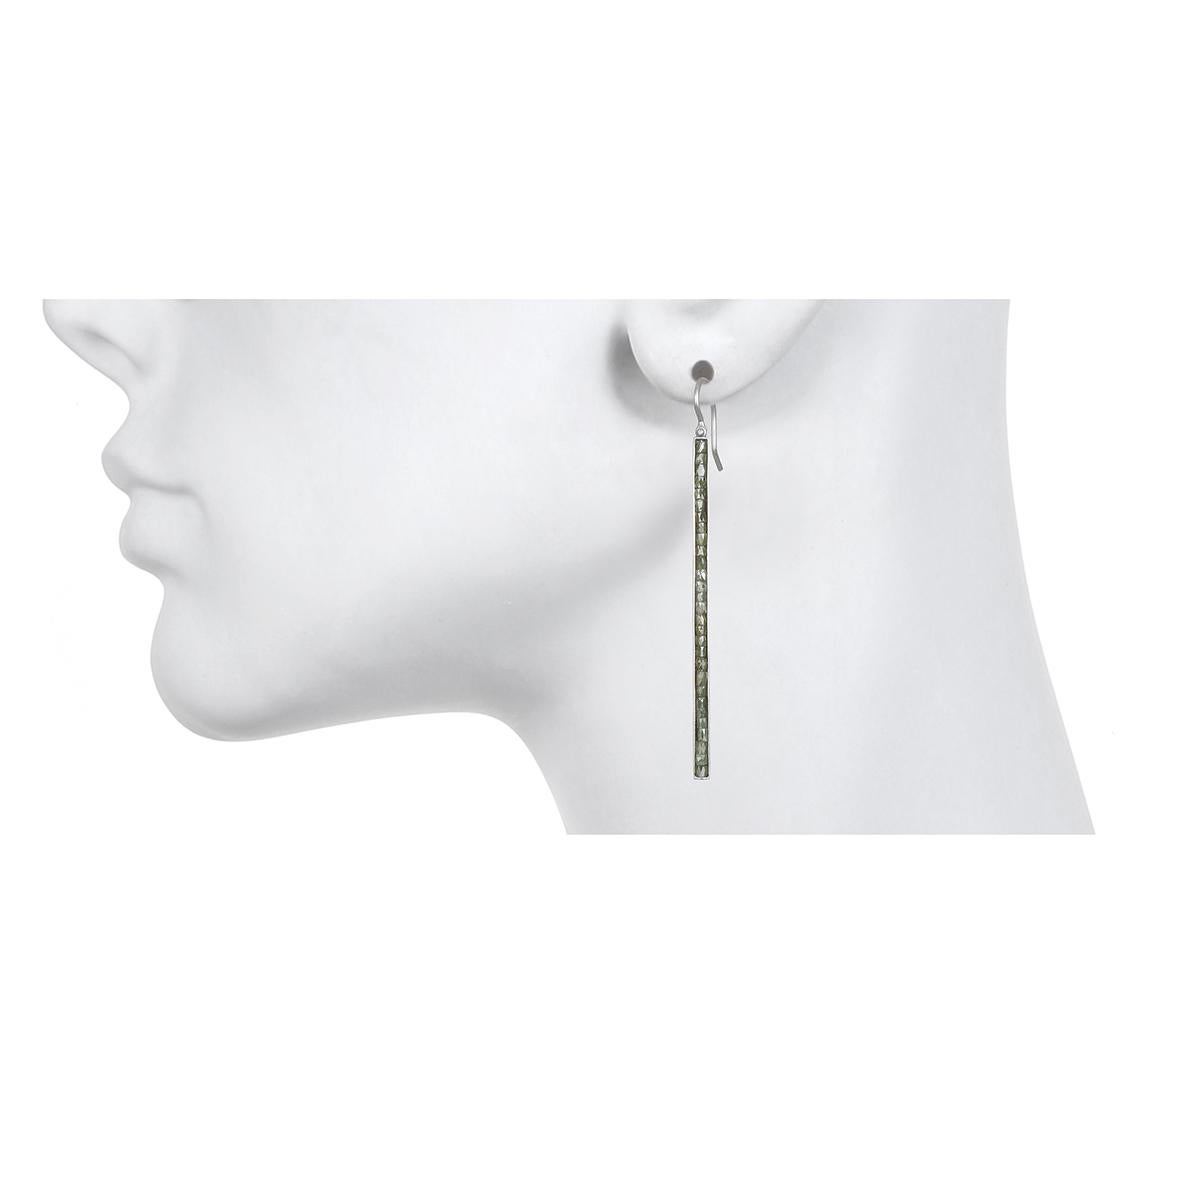 Feminine yet edgy, the matchstick style platinum earrings feature green diamonds that are channel set for a clean, sleek look.  The hinge detail provides movement and sparkle. Matte-finished.
Diamonds: Natural green color 3.22 Carats twt
Length